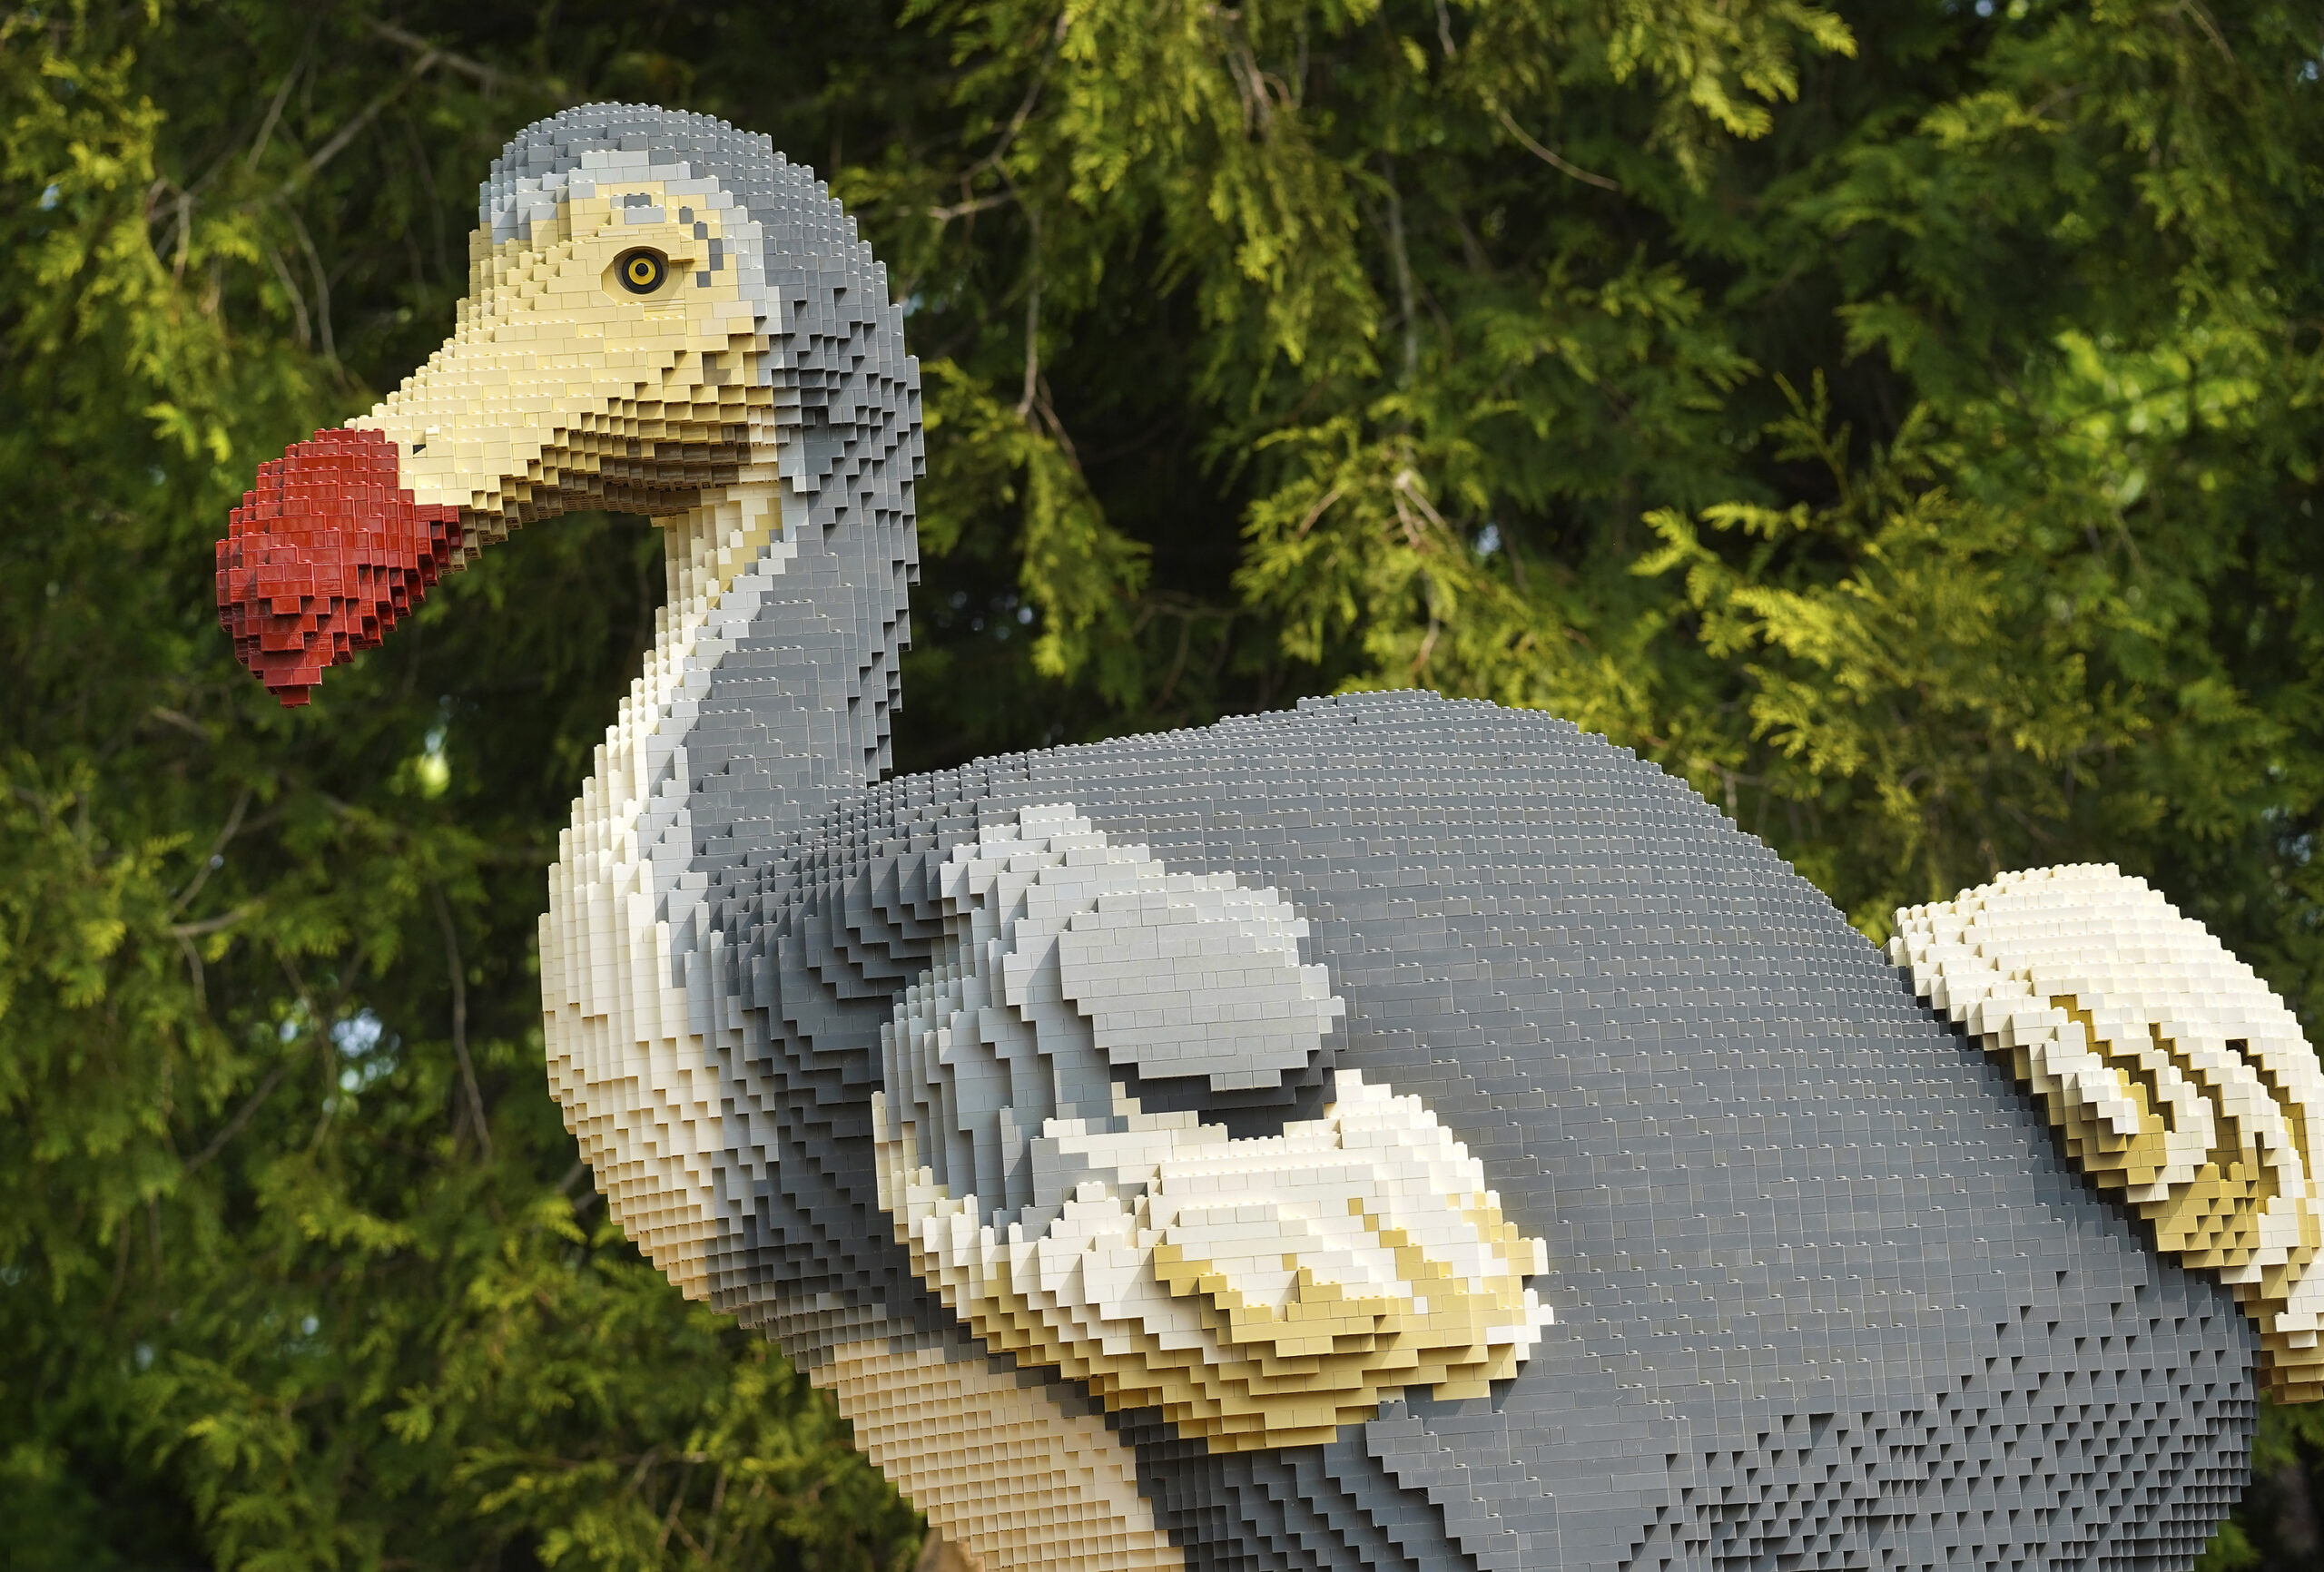 Sean Kenney’s Nature Connects® Made with LEGO® Bricks